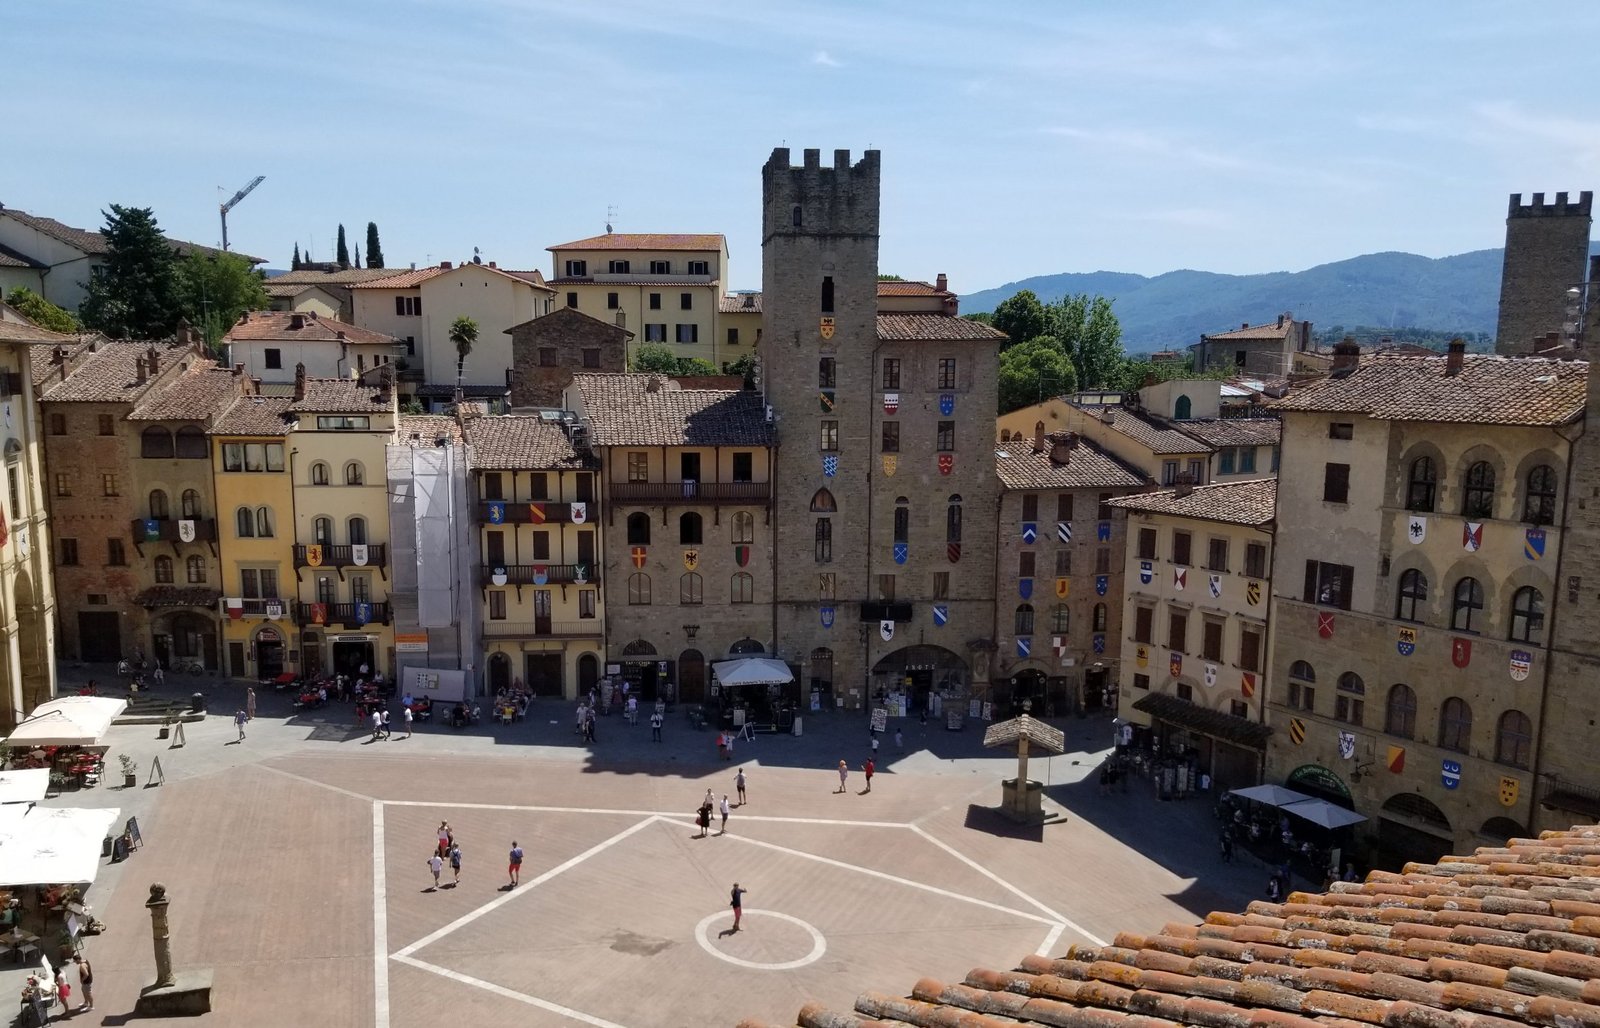 Spotlight: Our love of Arezzo and return in 2020. Arezzo is in Tuscany, Italy. https://ouritalianjourney.com/arezzo-tuscany-italy